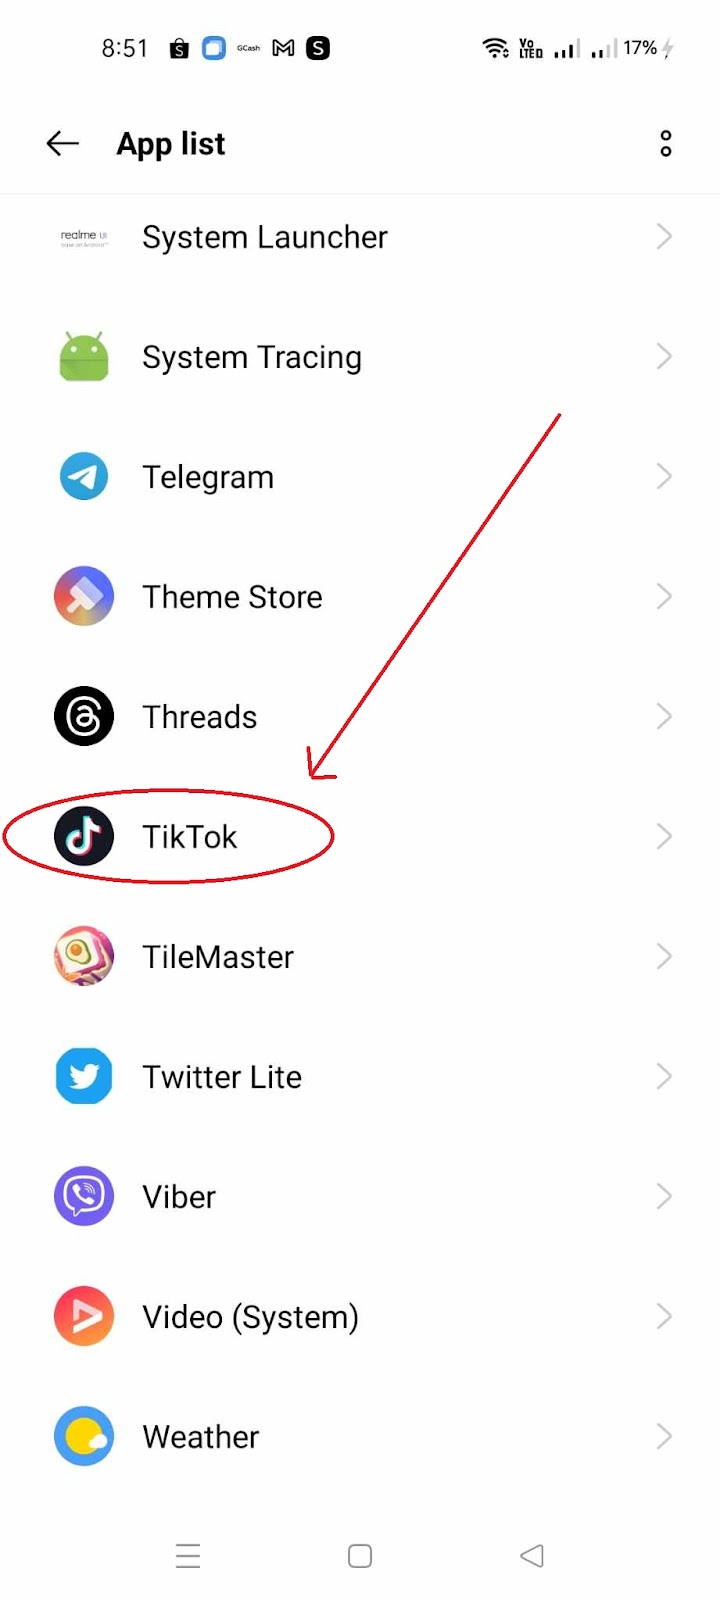 Why am I unable to follow someone on TikTok - Find Tiktok in the App List